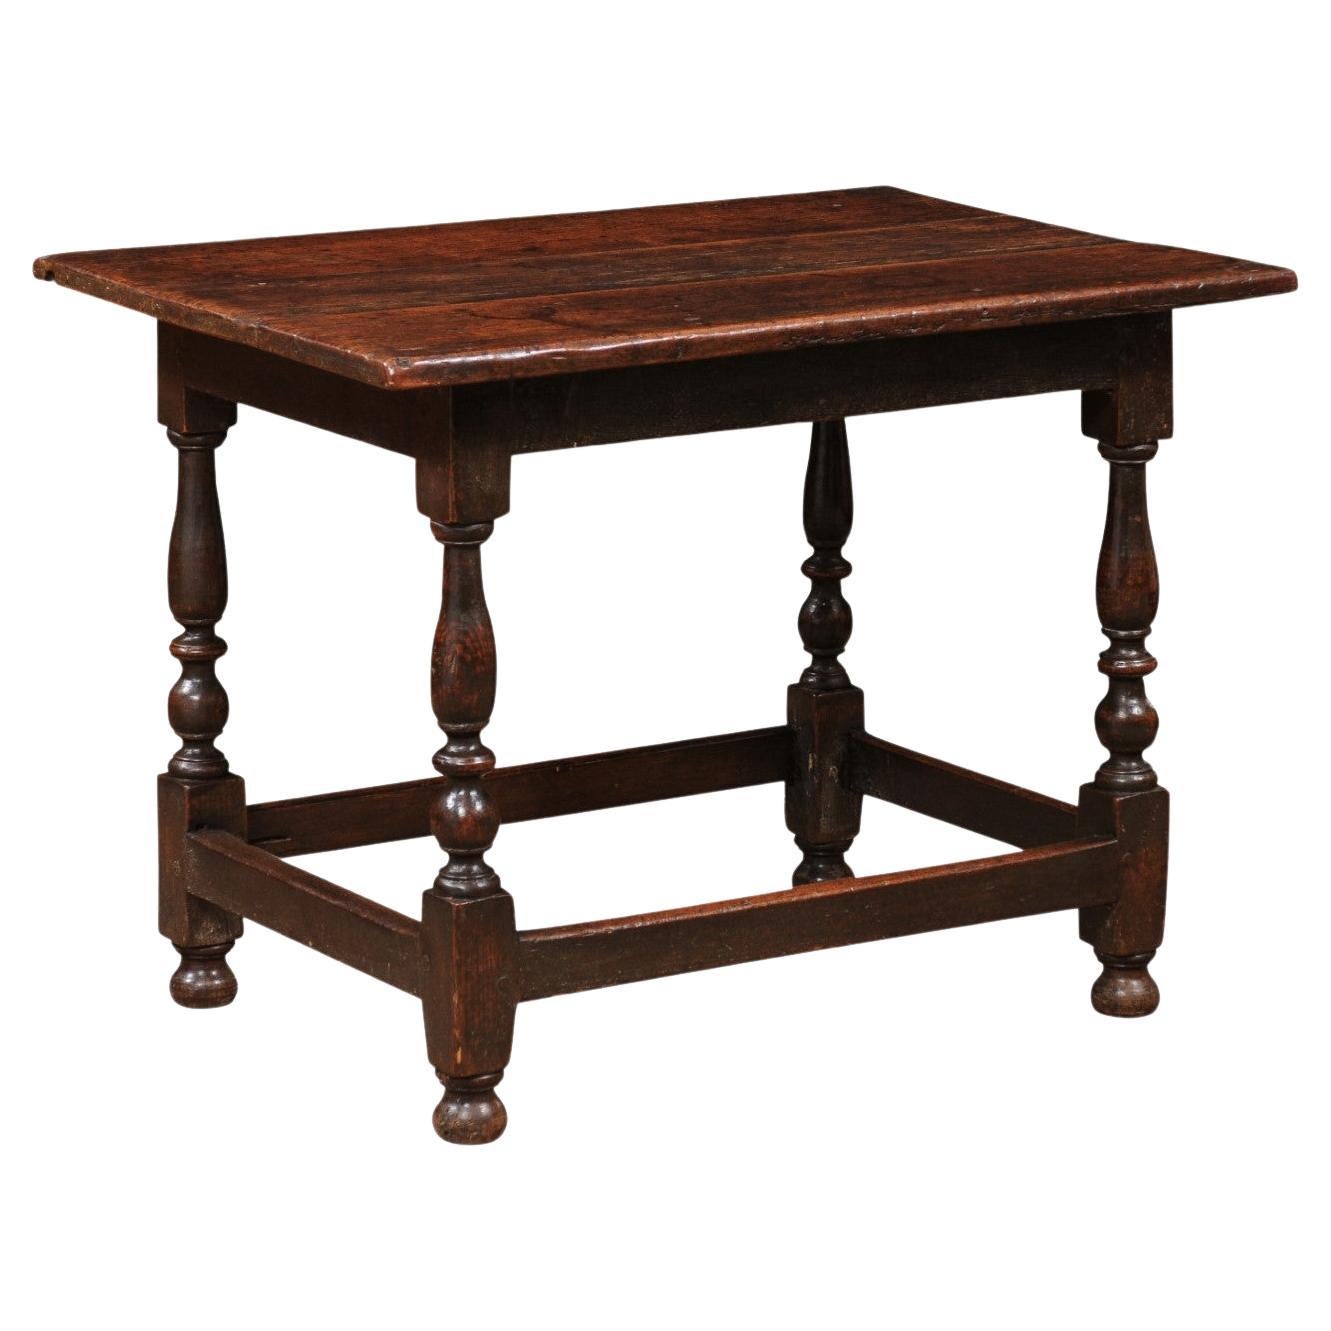 18th Century English William & Mary Oak Tavern Table with Turned Legs For Sale